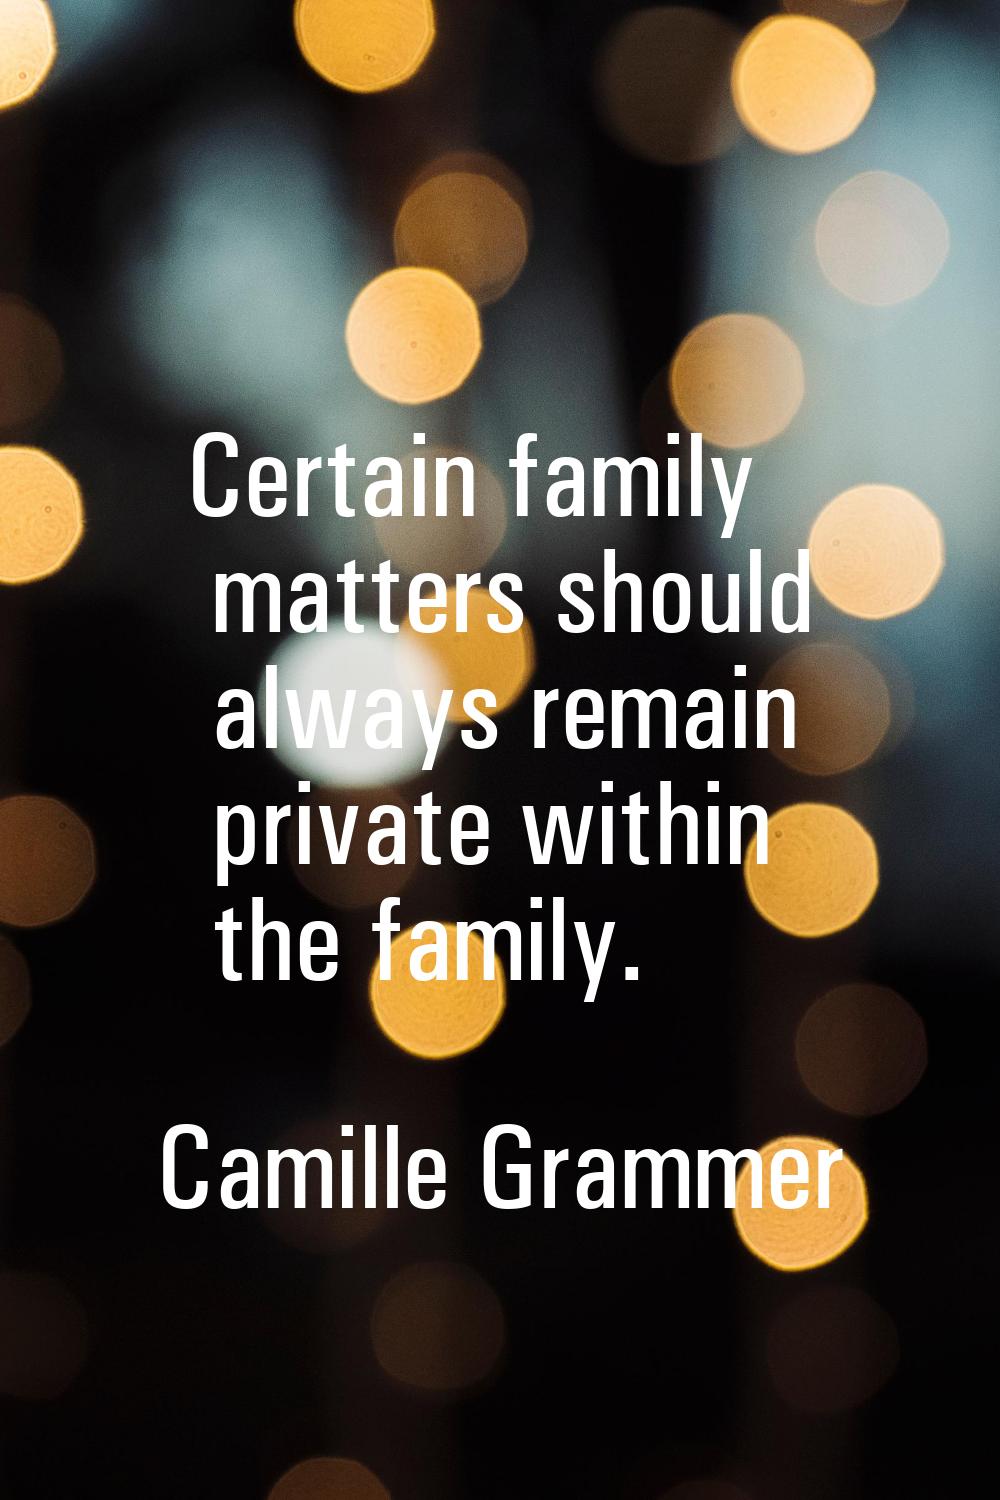 Certain family matters should always remain private within the family.